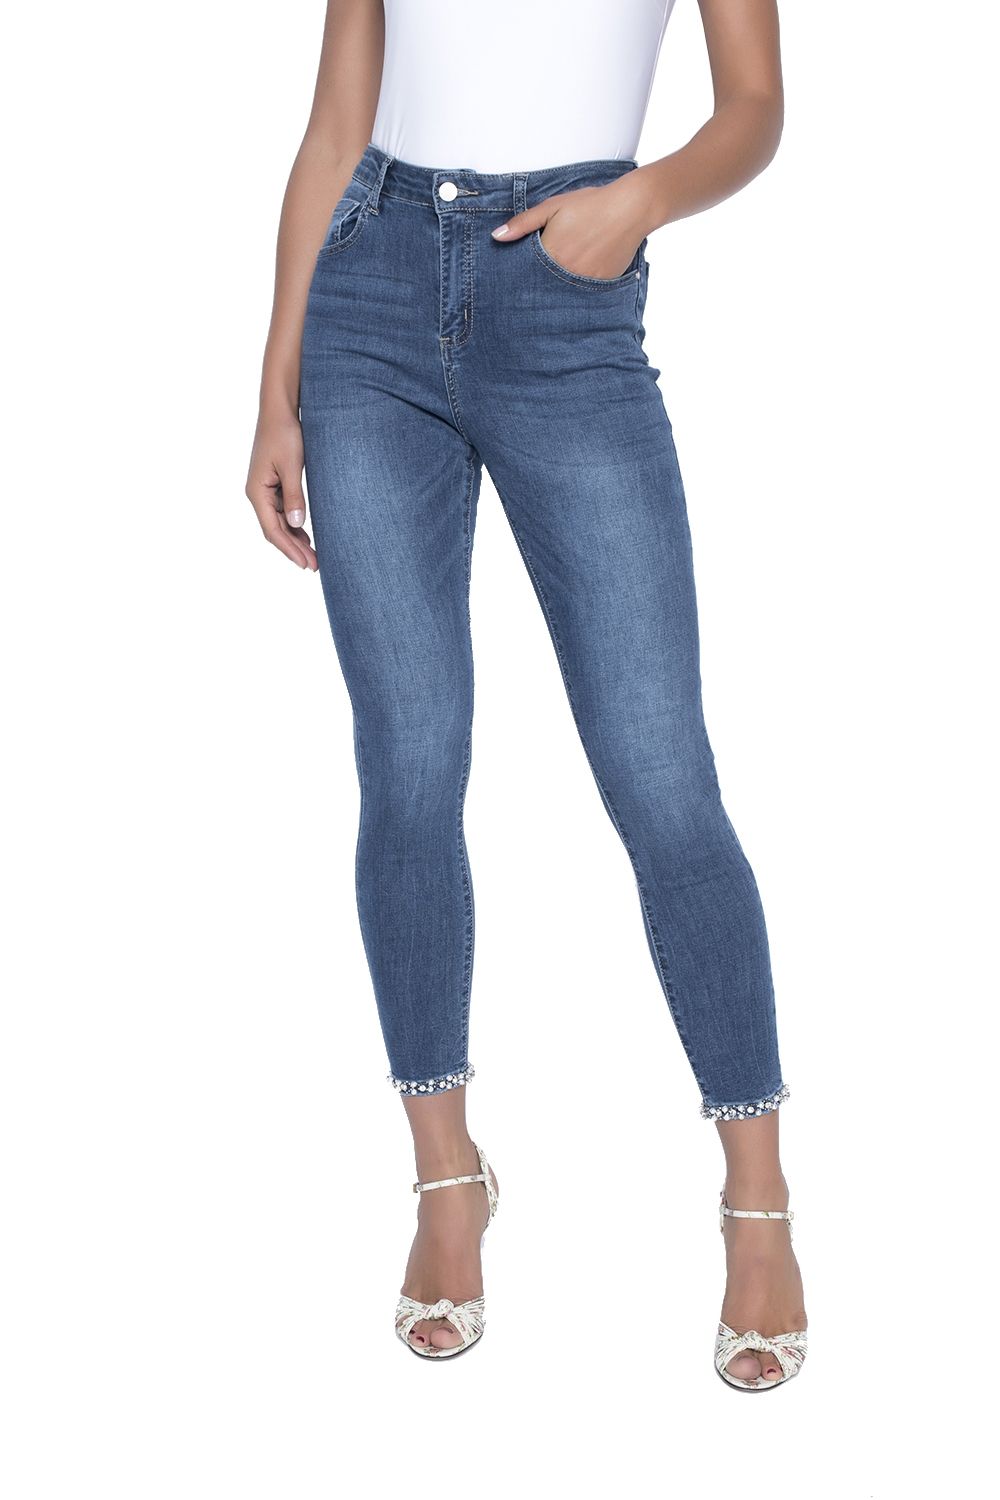 Frank Lyman Pearl Bow Embellished Jean front